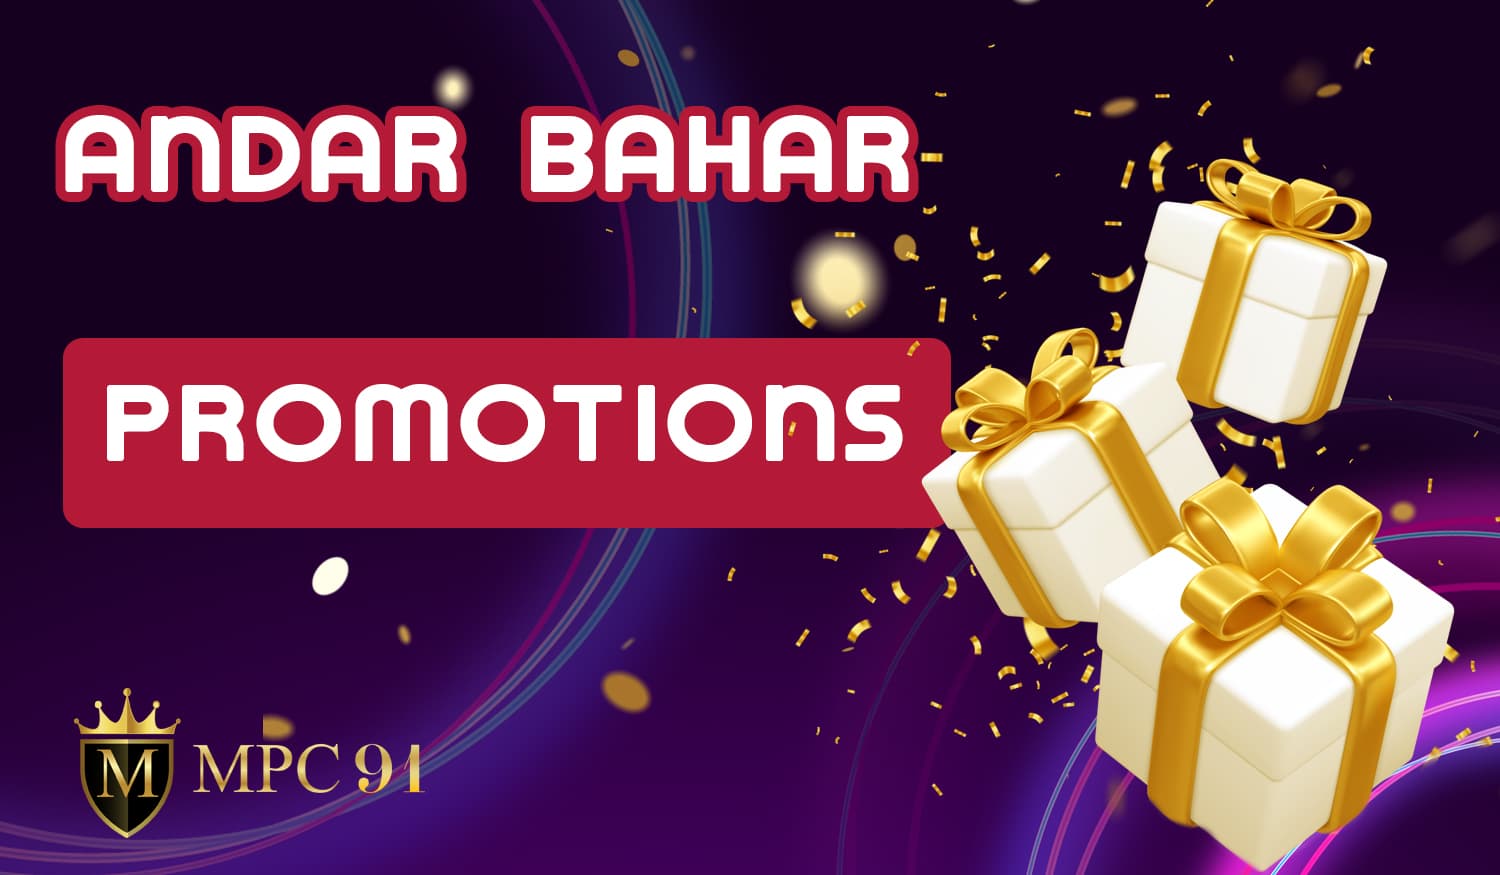 Promotions and bonuses available for Andar Bahar fans at MPC91 Casino site